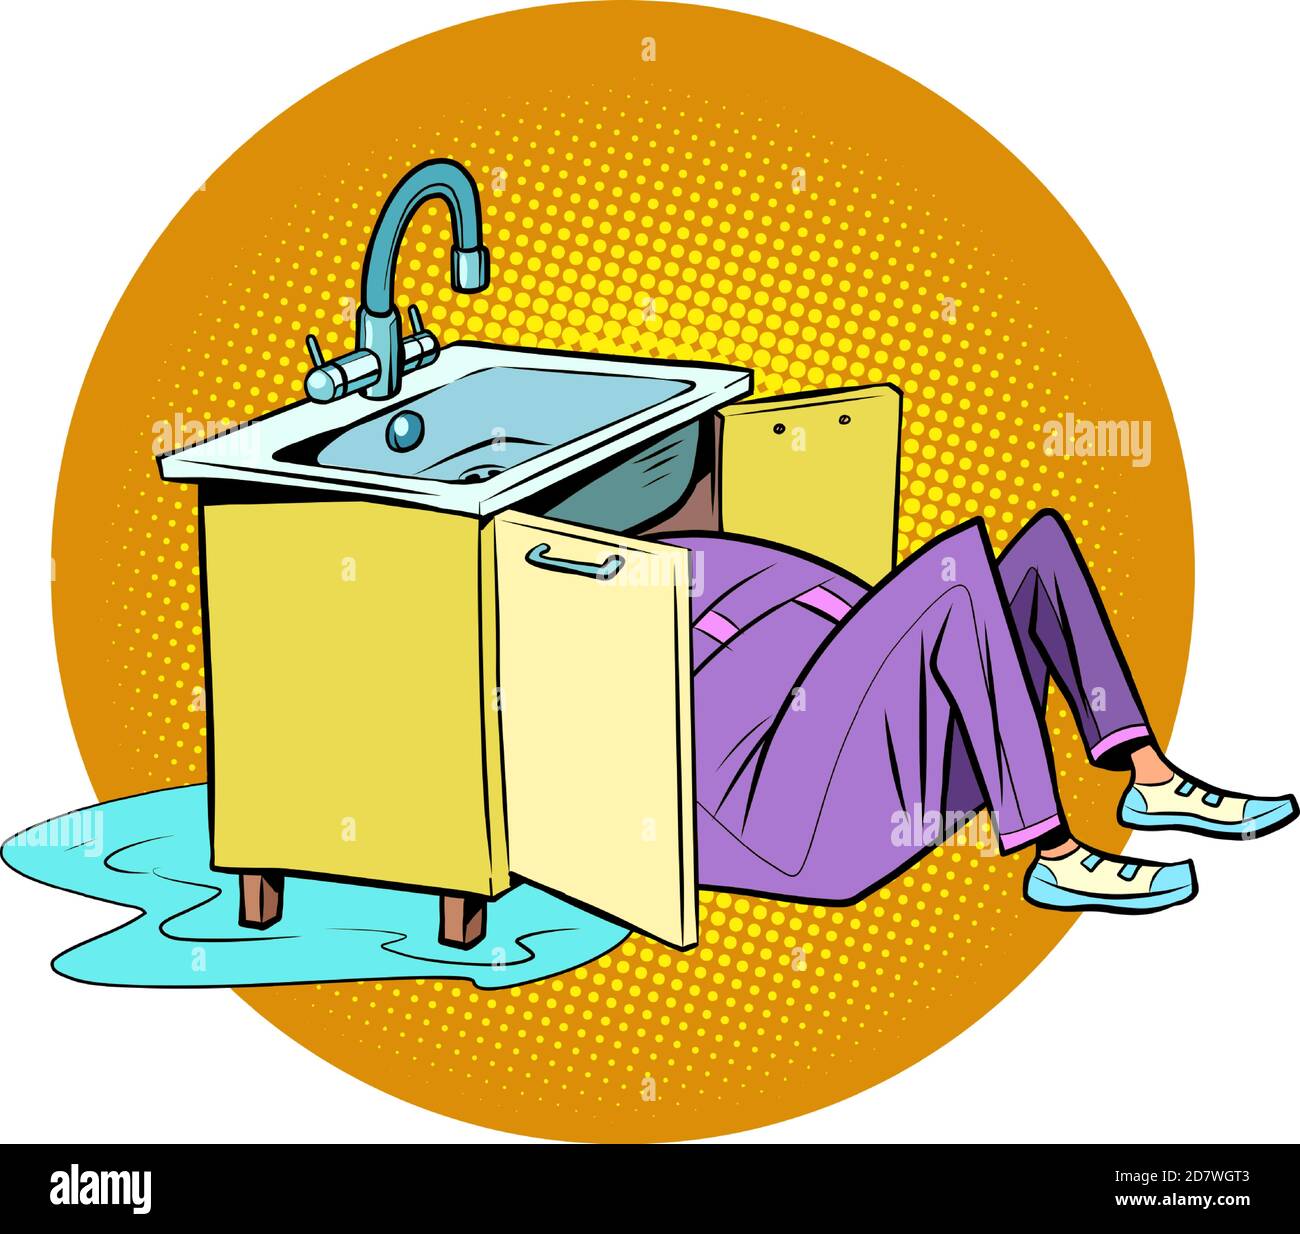 Plumber to repair the kitchen sink Stock Vector